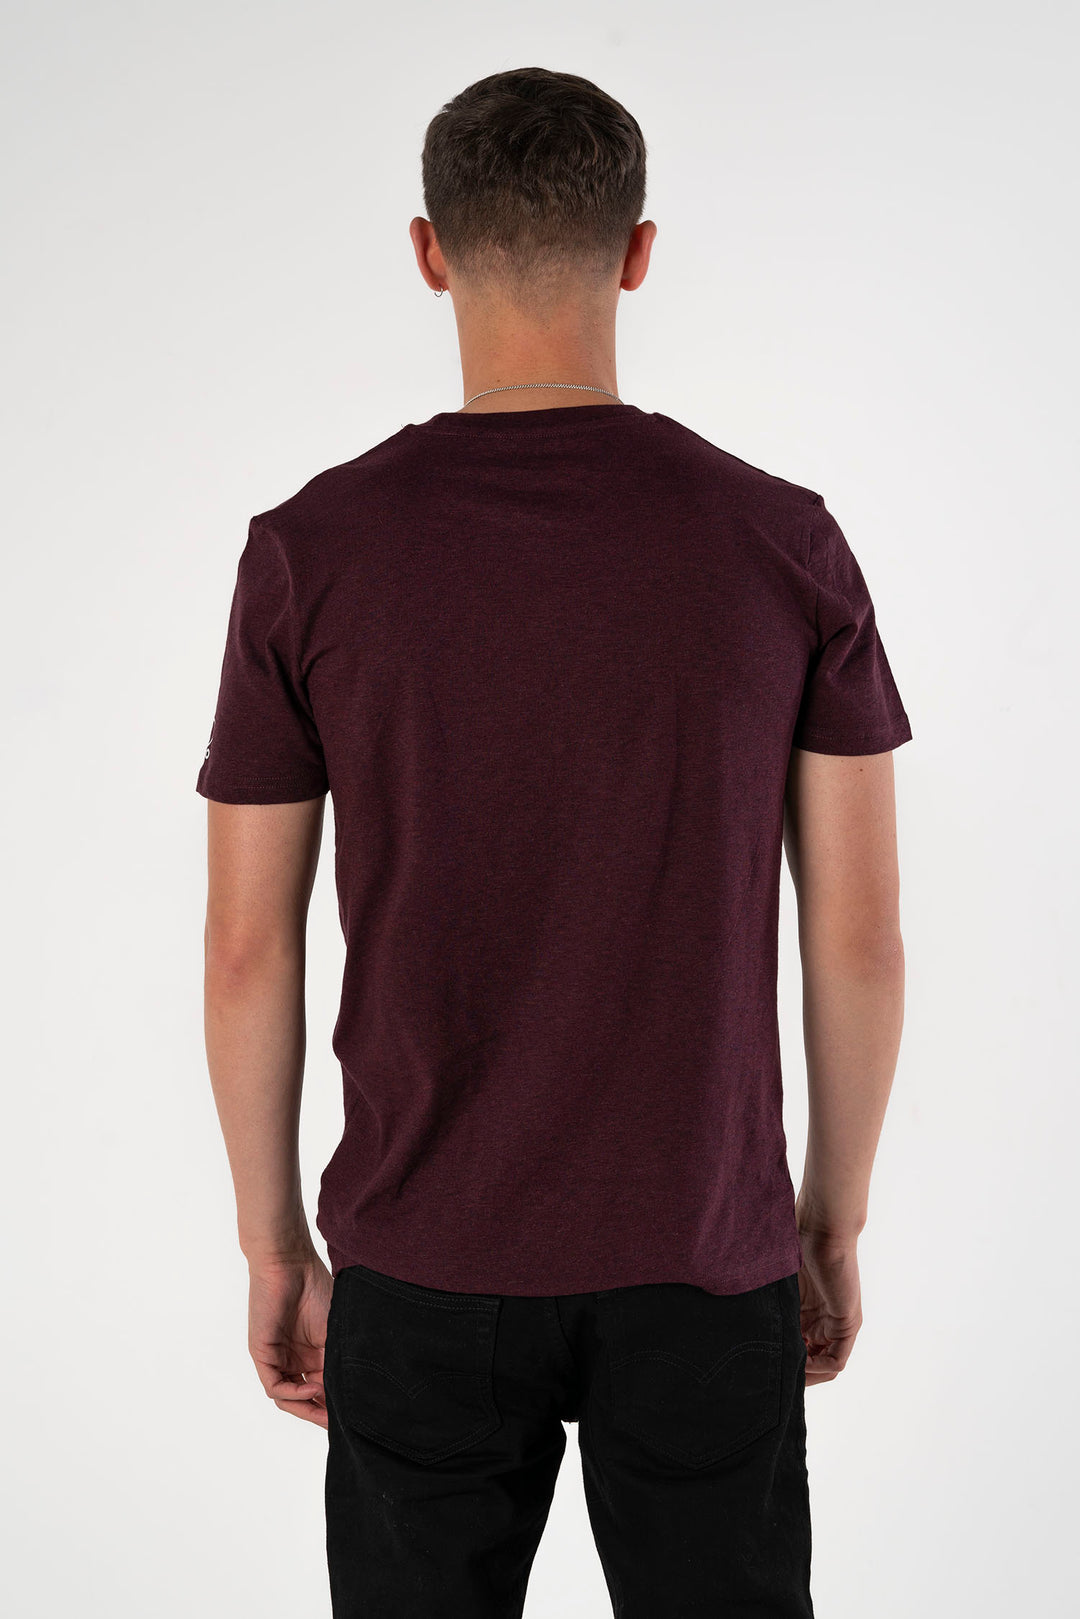 Wine Red - Evolve Collection T-shirt-T-shirts-PIRKANI